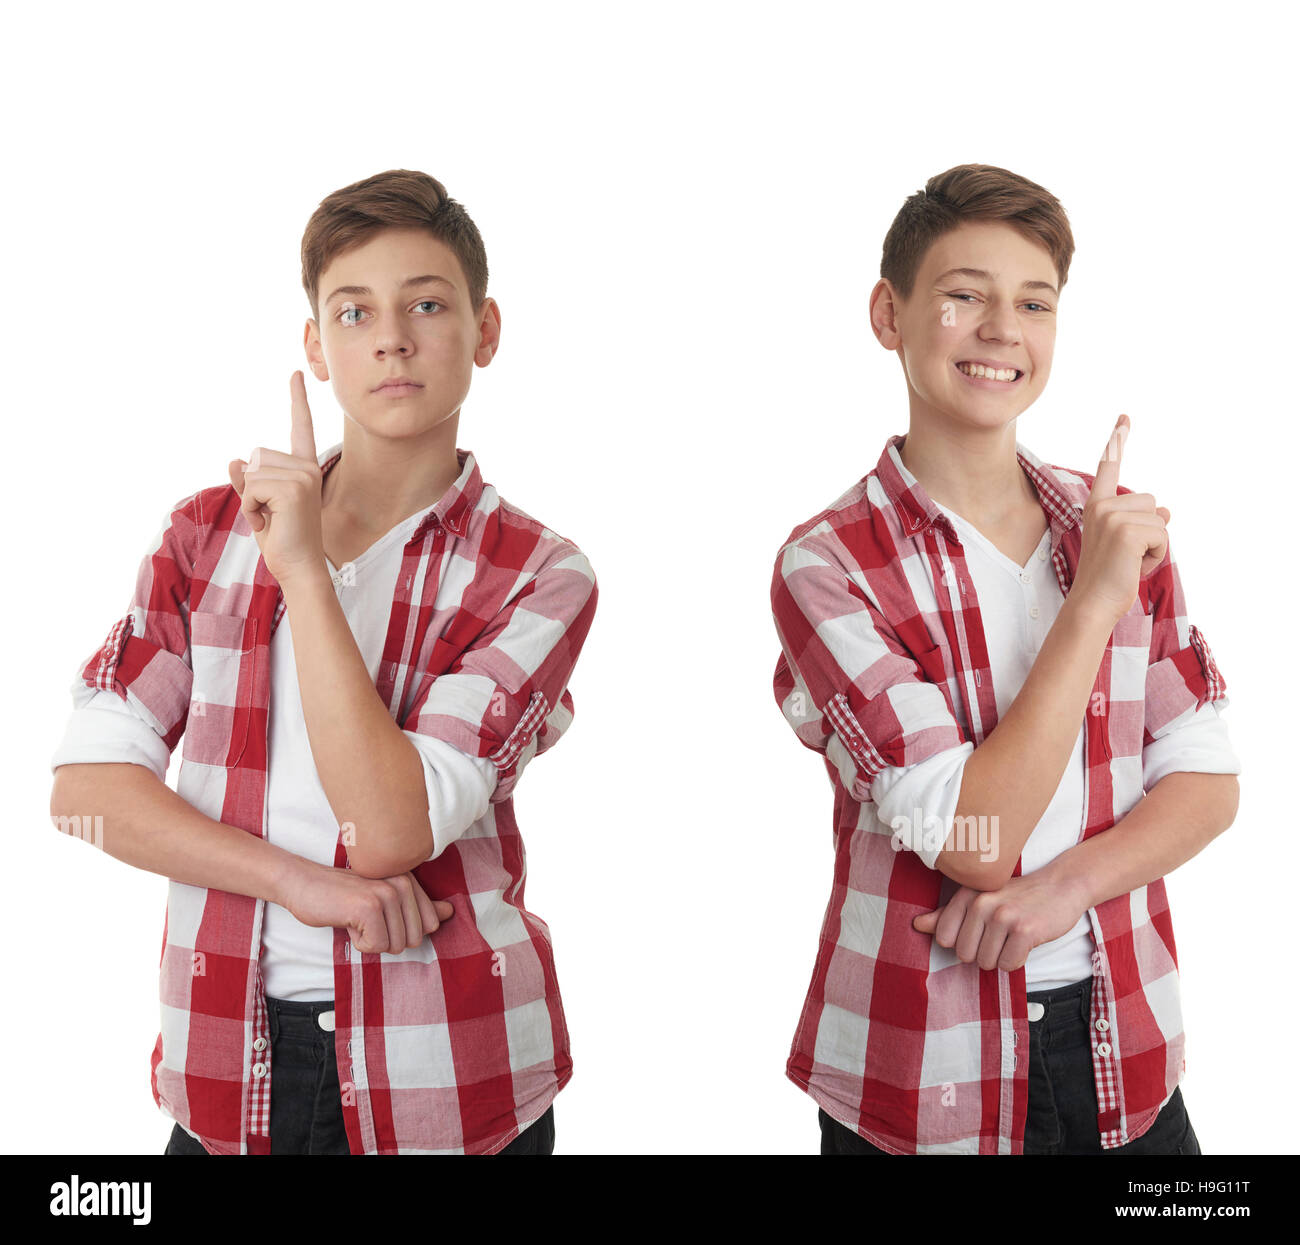 Cute teenager boy over white isolated background Stock Photo